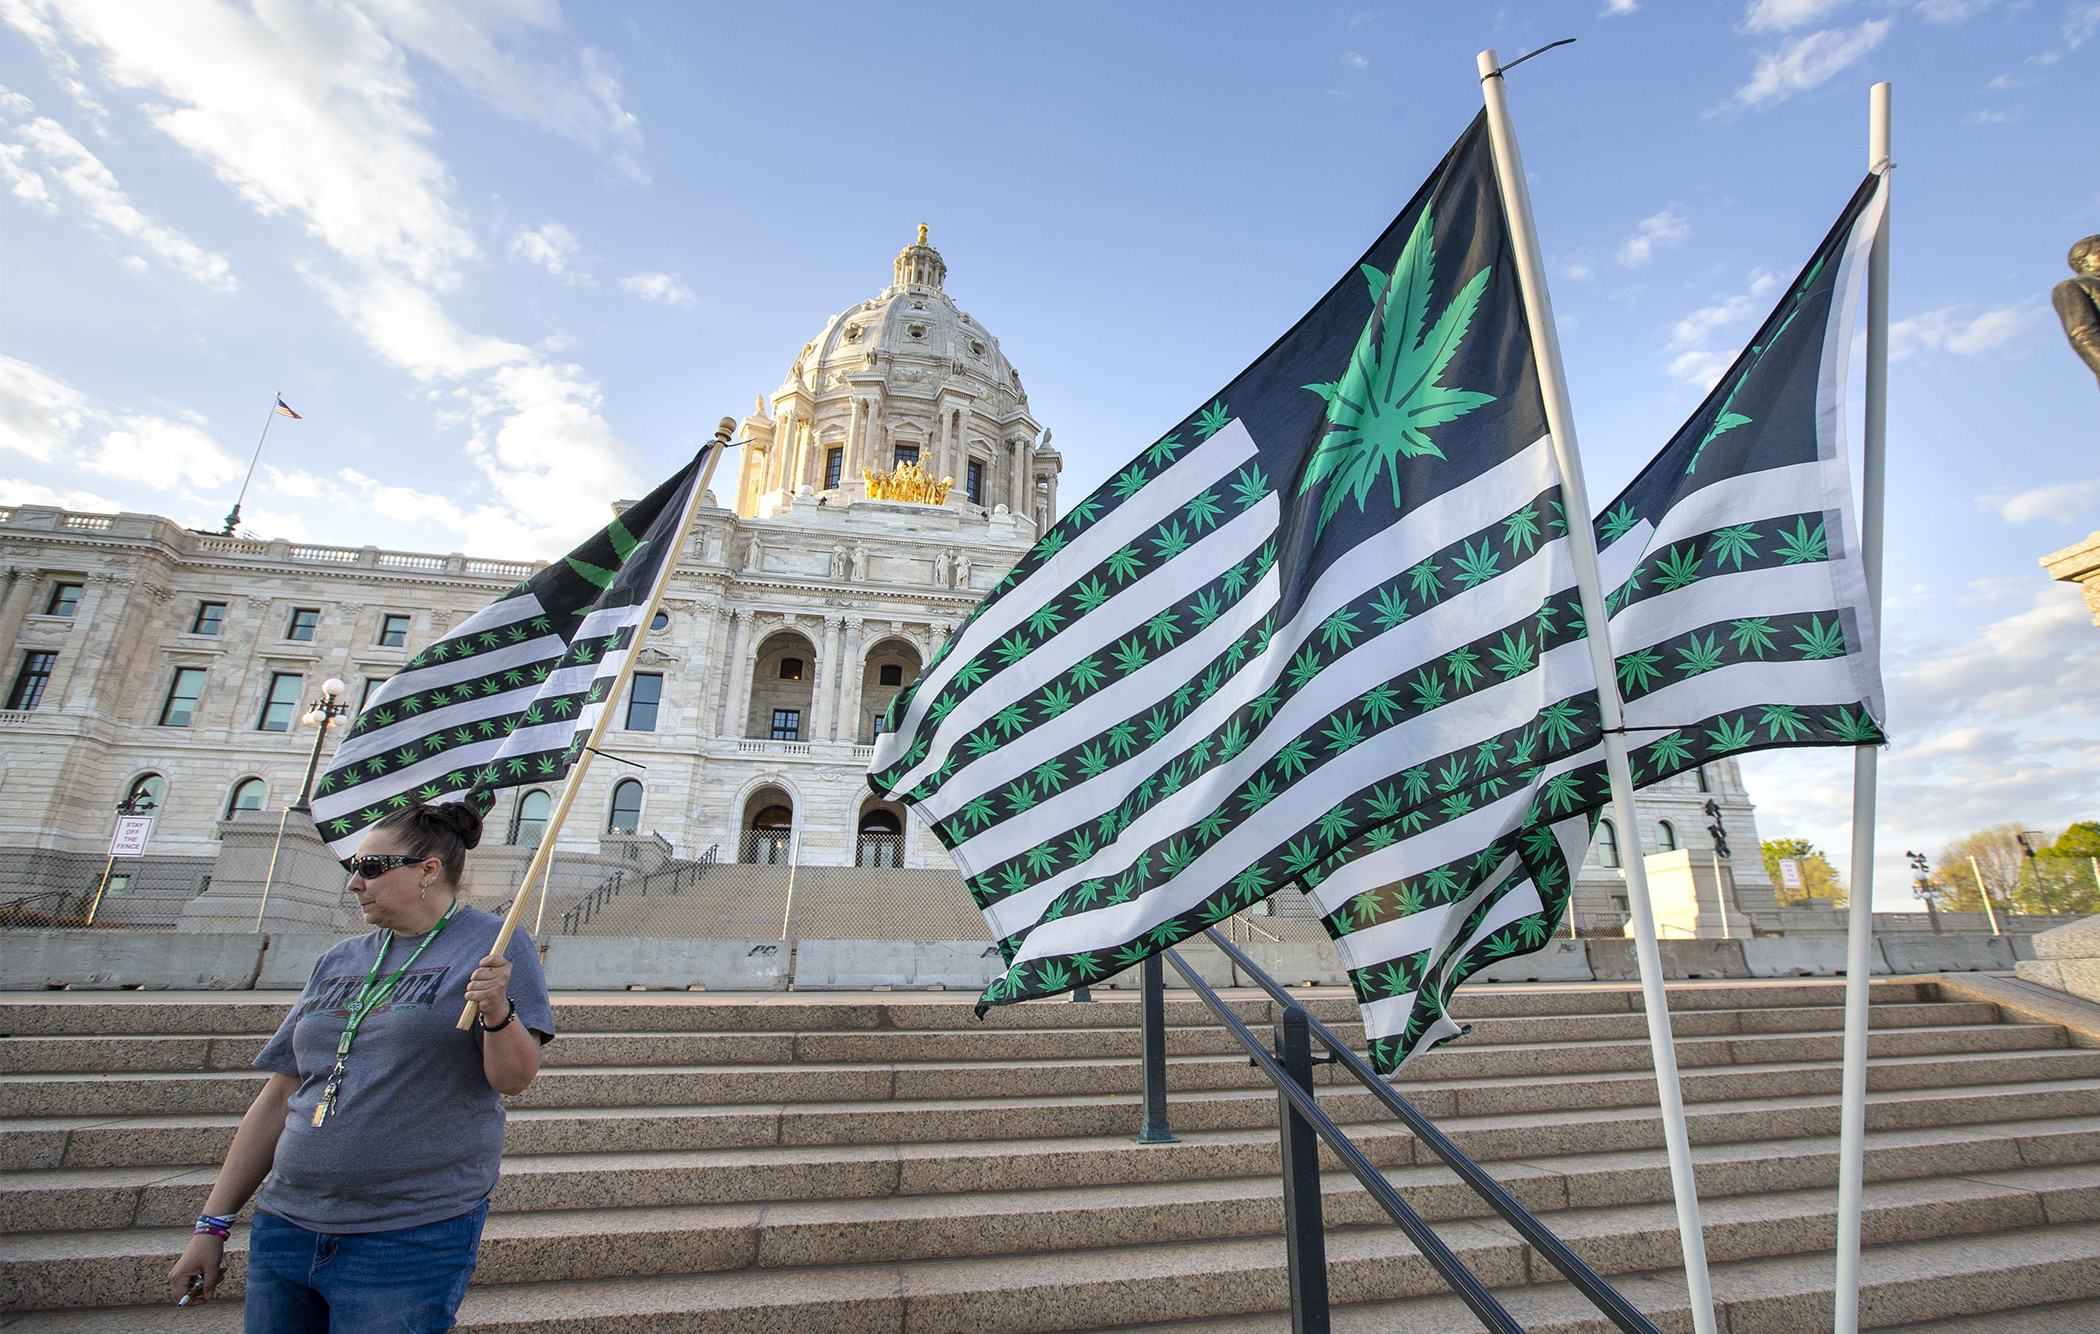 A supporter of marijuana legalization shows their support on the Capitol steps in May 2021. HF100, a bill to legalize adult-use recreational marijuana, cleared its first House committee Jan. 11. (House Photography file photo)